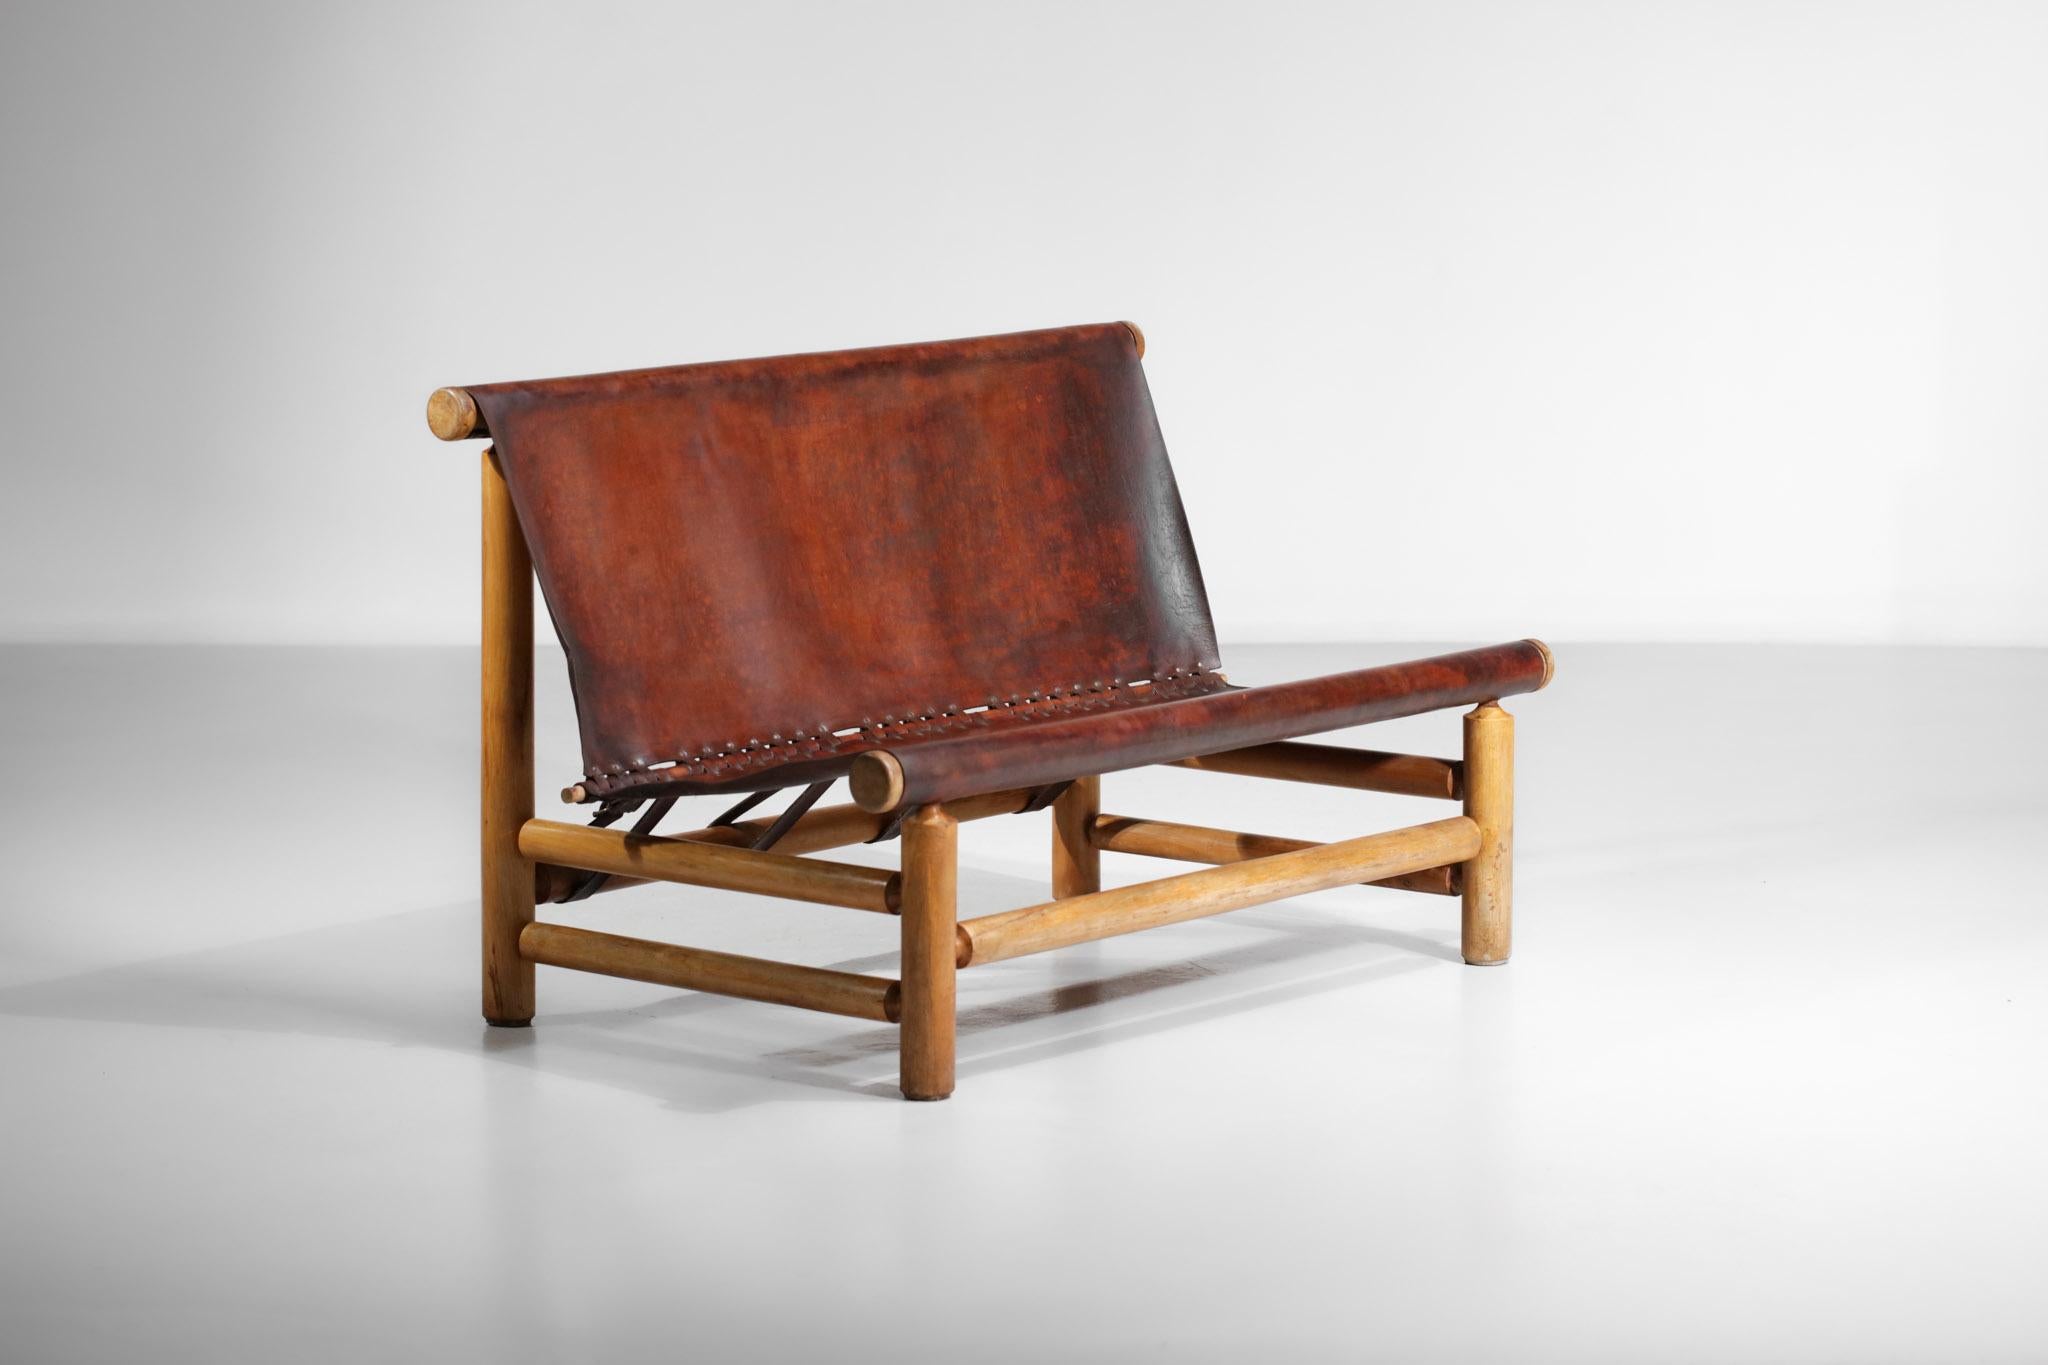 Pine Bench 50s Style Charlotte Perriand or Ilmarii Tapiovaraa Cognac Leather For Sale 10